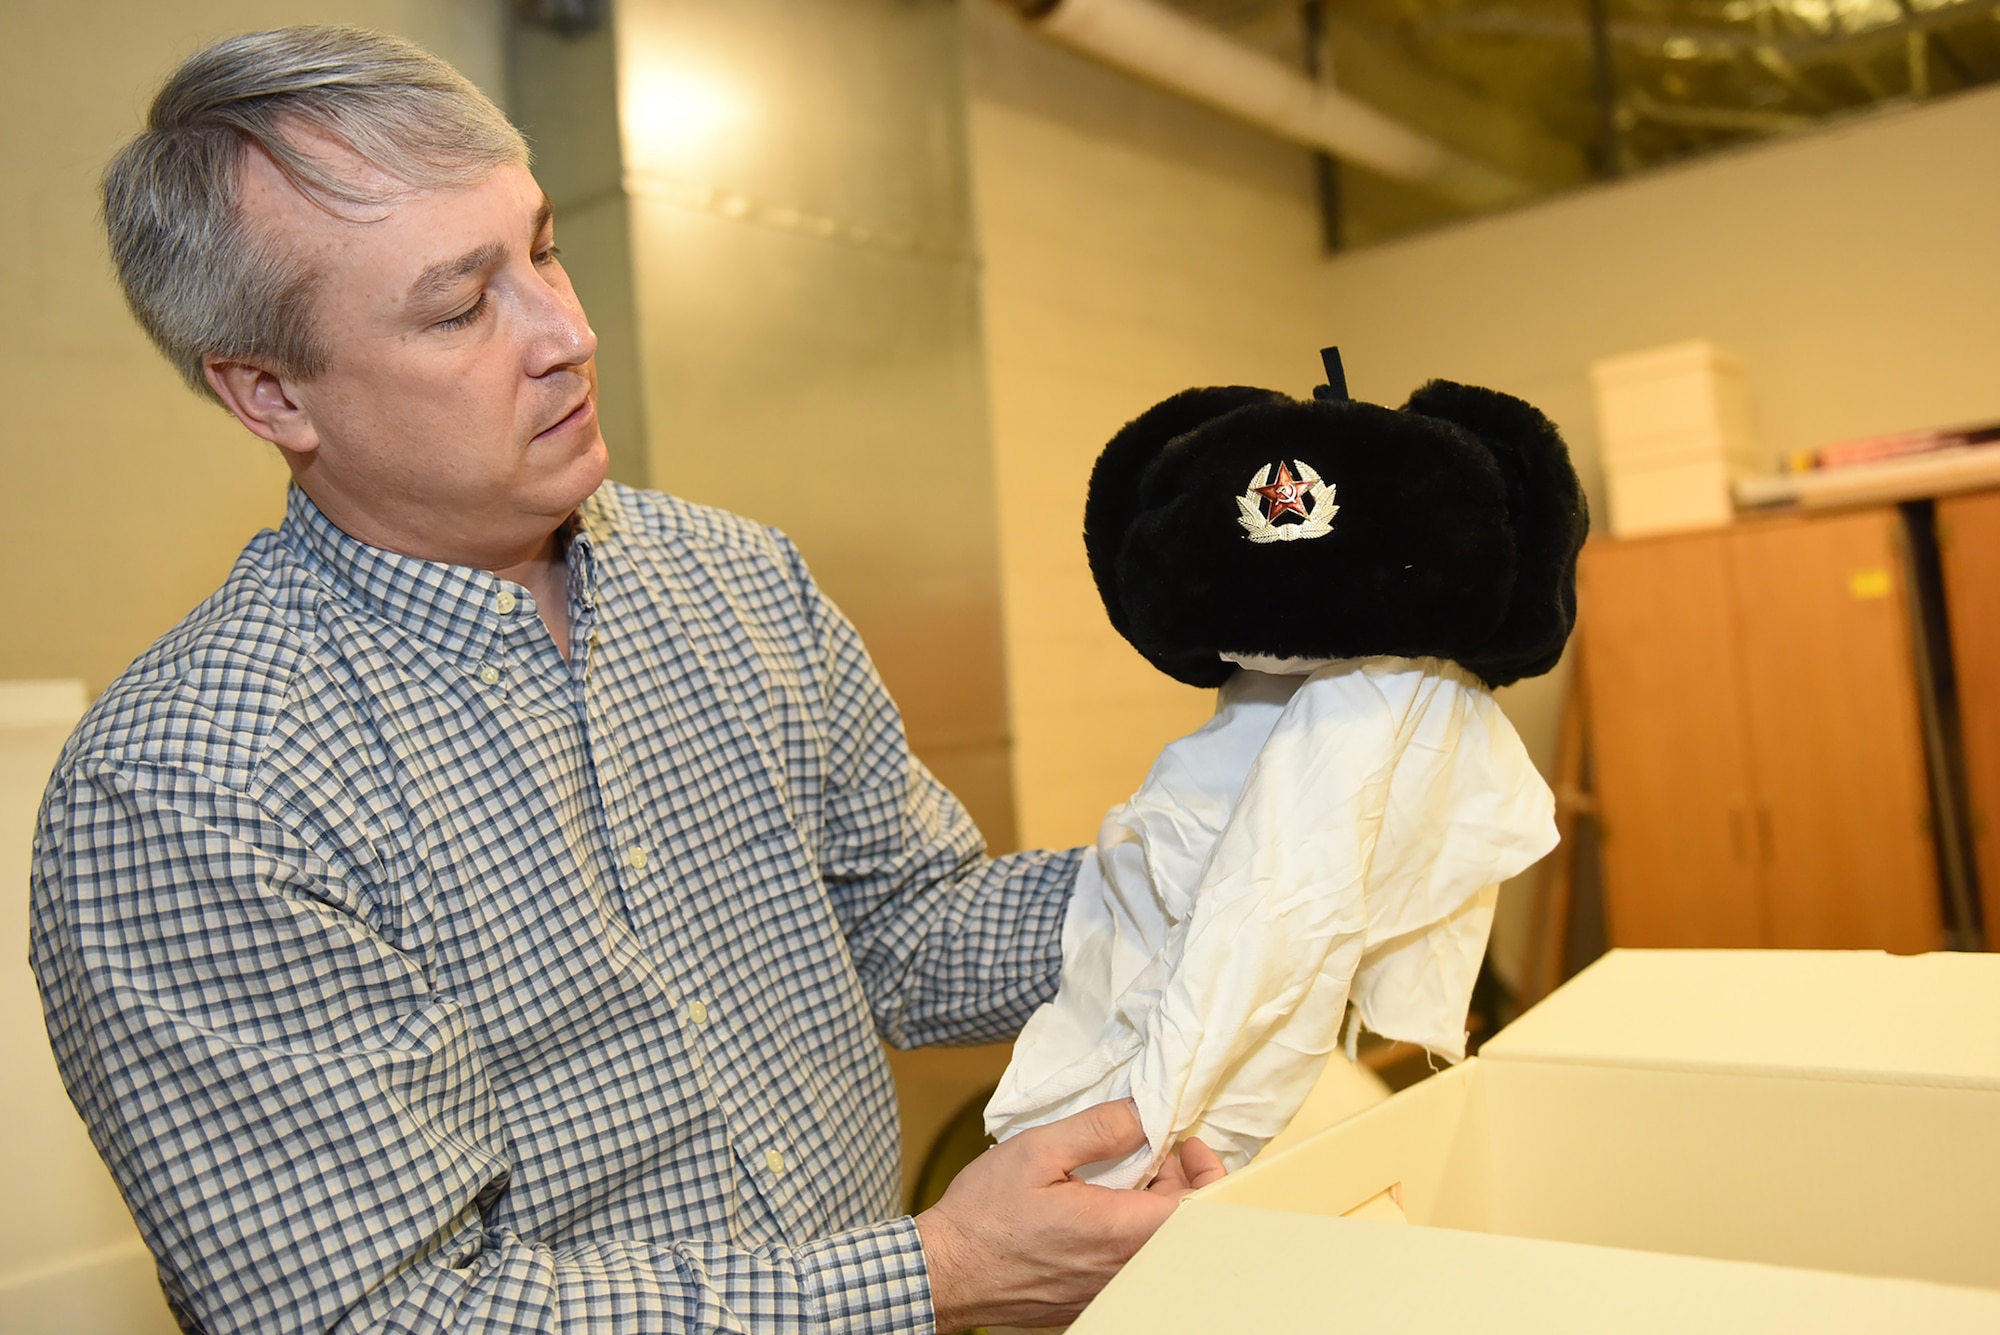 Rob Turnbow, the Malmstrom Historic Exhibit and Air Park curator, takes inventory of a Soviet-Army issued winter hat from the Cold War Jan. 26, 2017 at Malmstrom Air Force Base, Mont.  The museum contains more than 400 items on display that depicts the history of Malmstrom Air Force Base and the Minuteman program.  (U.S. Air Force photo/Jason Heavner)